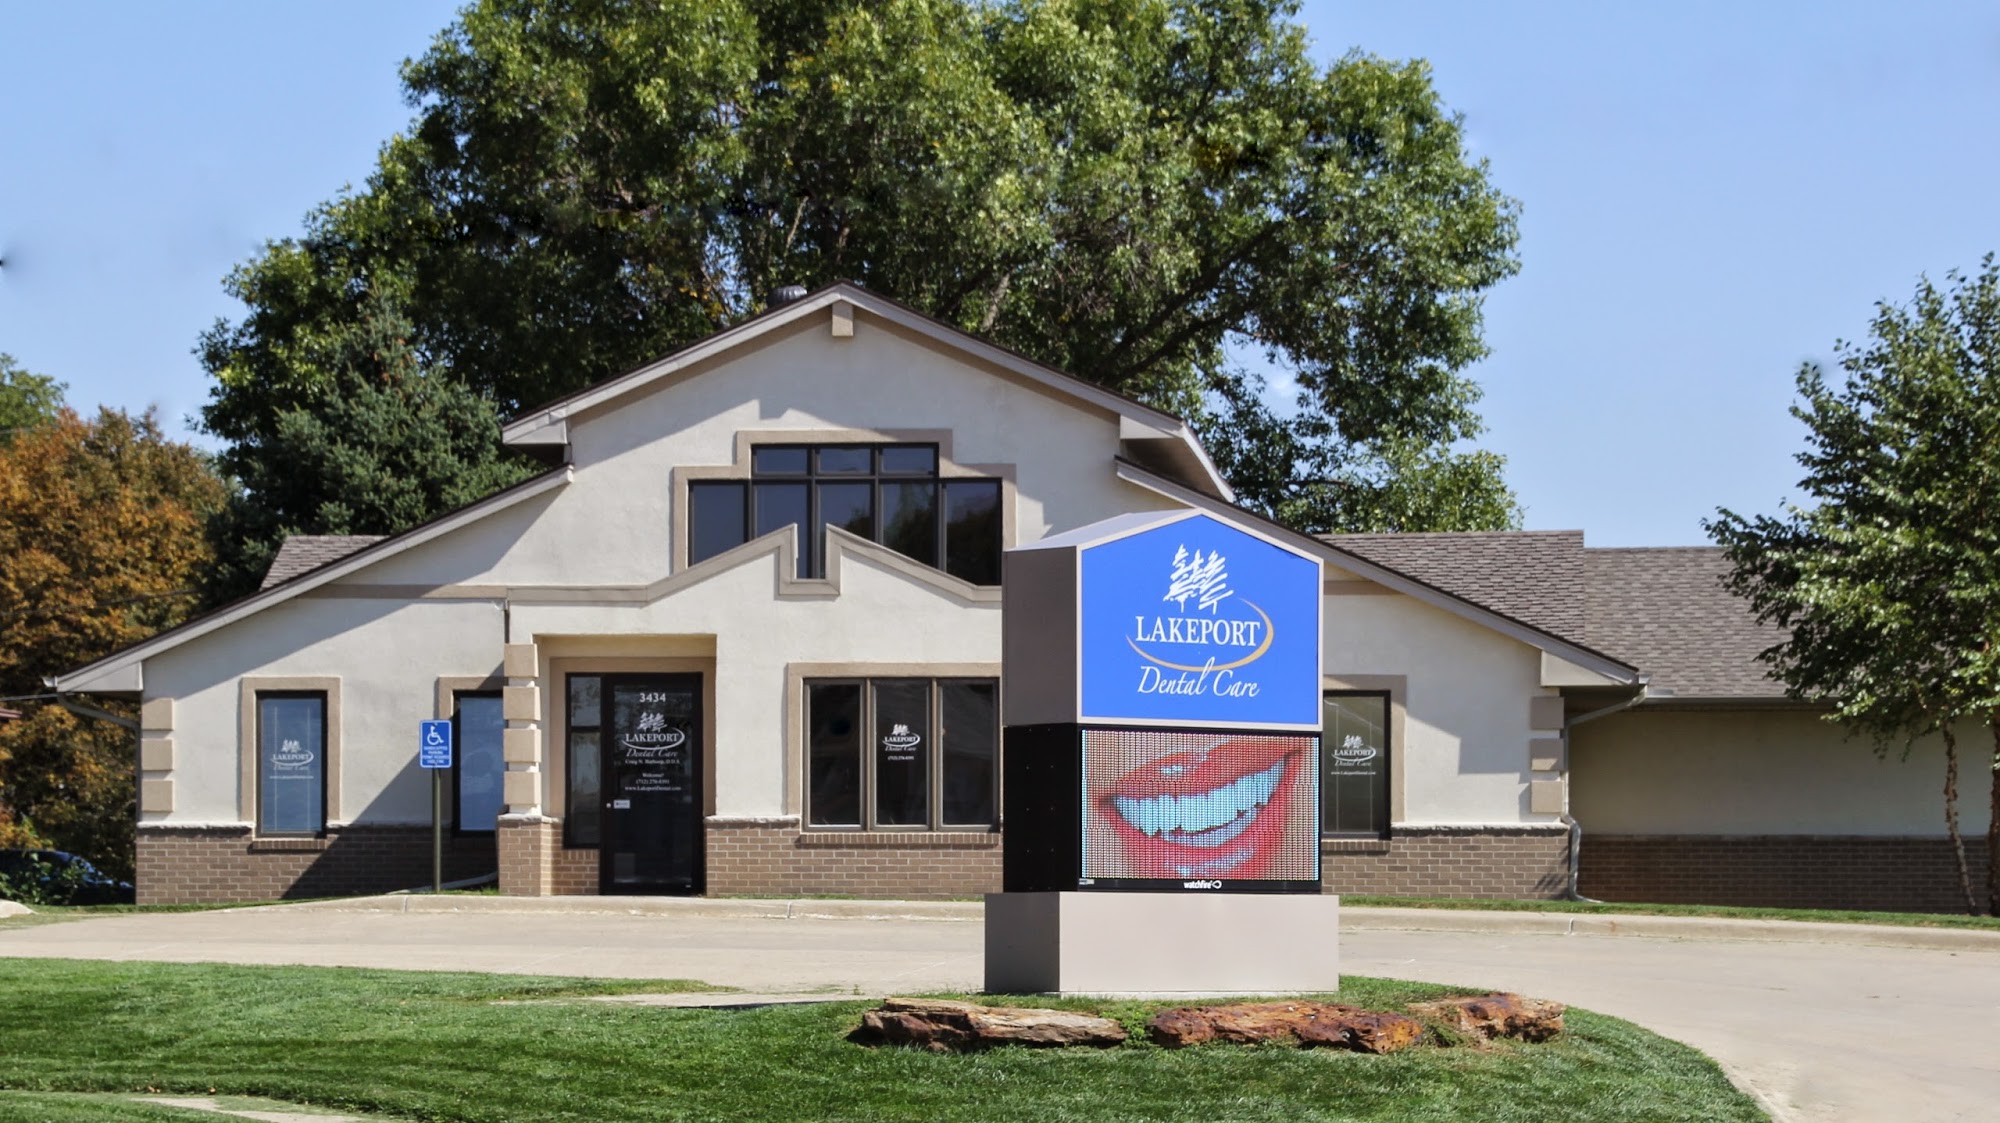 The Dentist of Siouxland at Lakeport